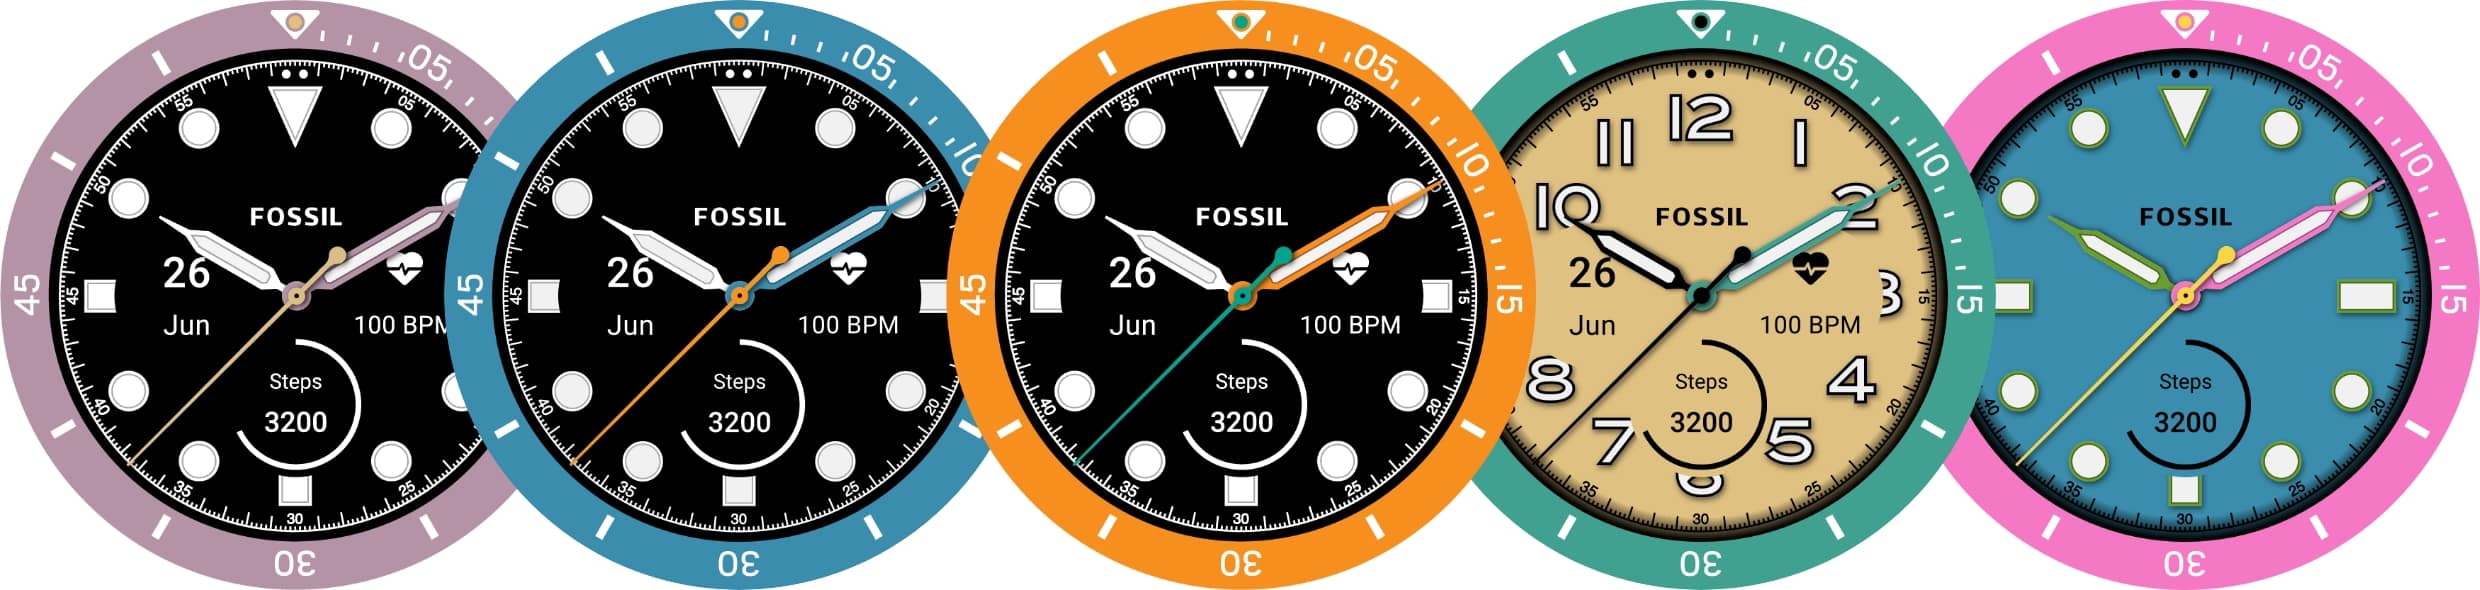 A variety of Fossil Defender watch faces, featuring the different customizable dial colors.